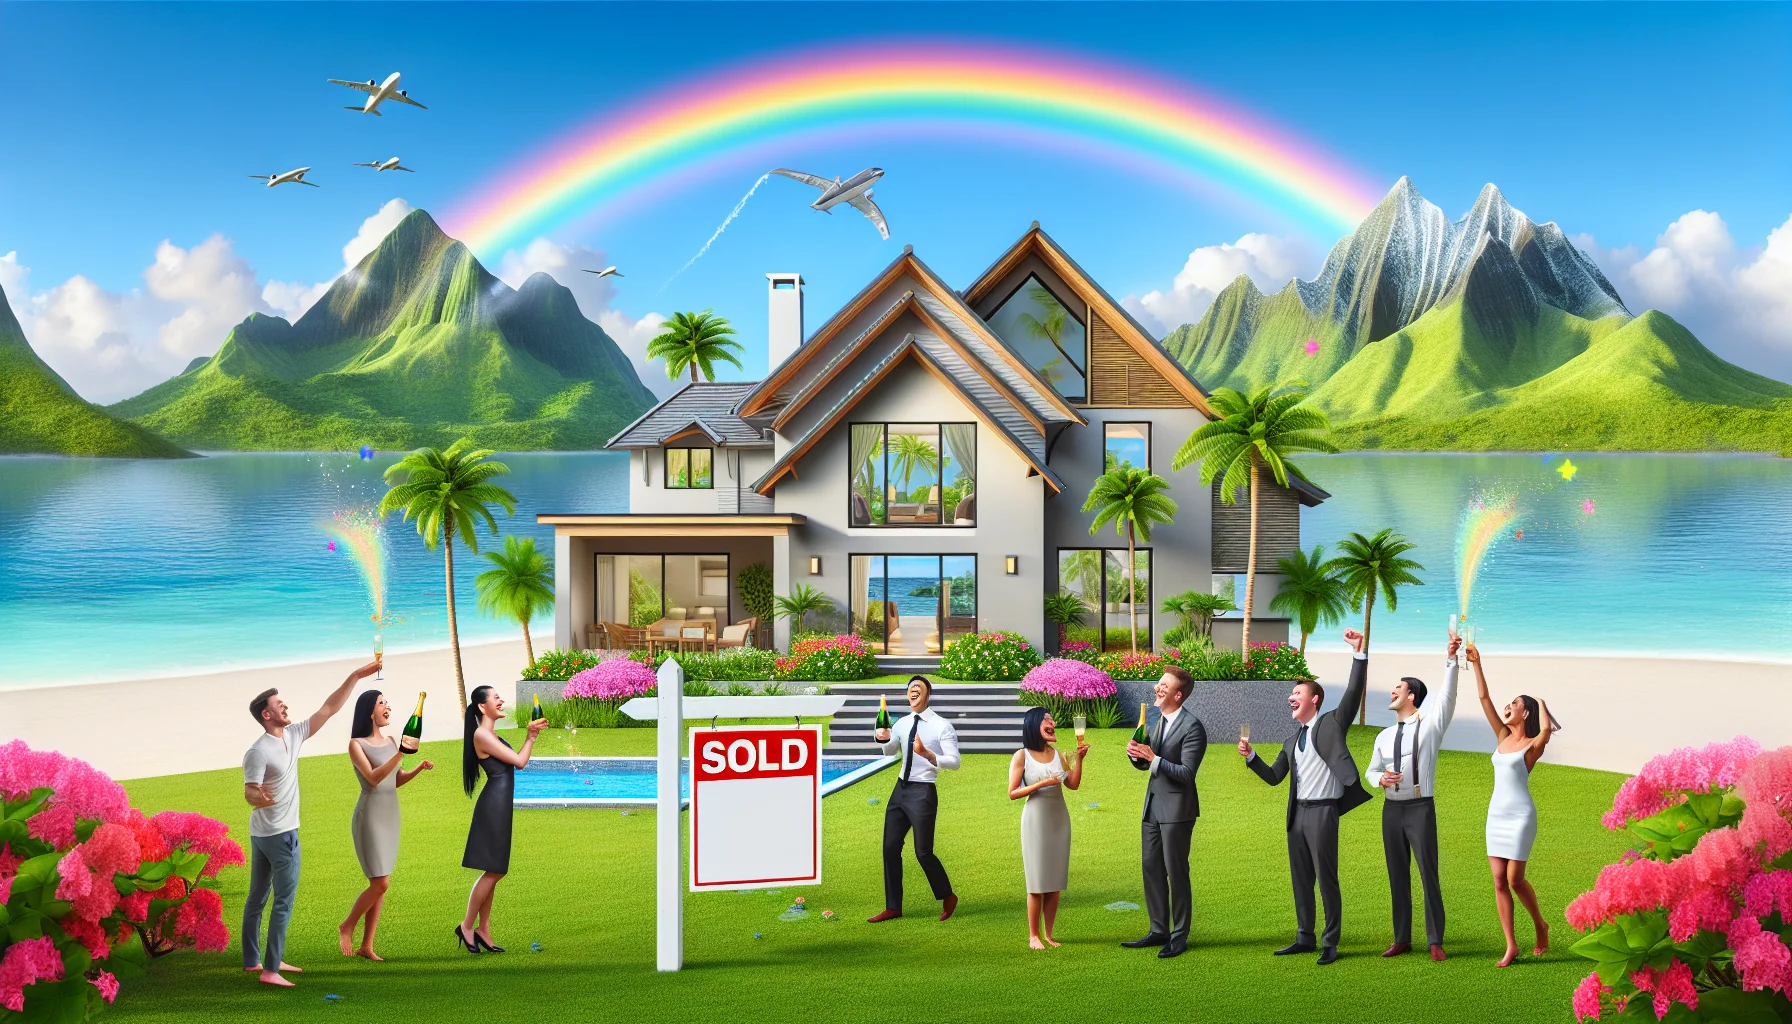 Depict a joyously surreal image of perfect property ownership. Imagine a beautifully crafted modern home with elegant gardens, pristine and bright, nestled between a tropical beach and picturesque, snow-capped mountains. A sold sign-post planted in the lush green front lawn with the word 'Congratulations' emblazoned on it. A group of people, including a Caucasian woman and an Asian man who could be the proud new owners, rejoicing around the sign, popping a bottle of champagne. In this reality, there is no property tax notice, happy neighbors waving from next door, and a rainbow arches overhead concluding this picturesque scene.